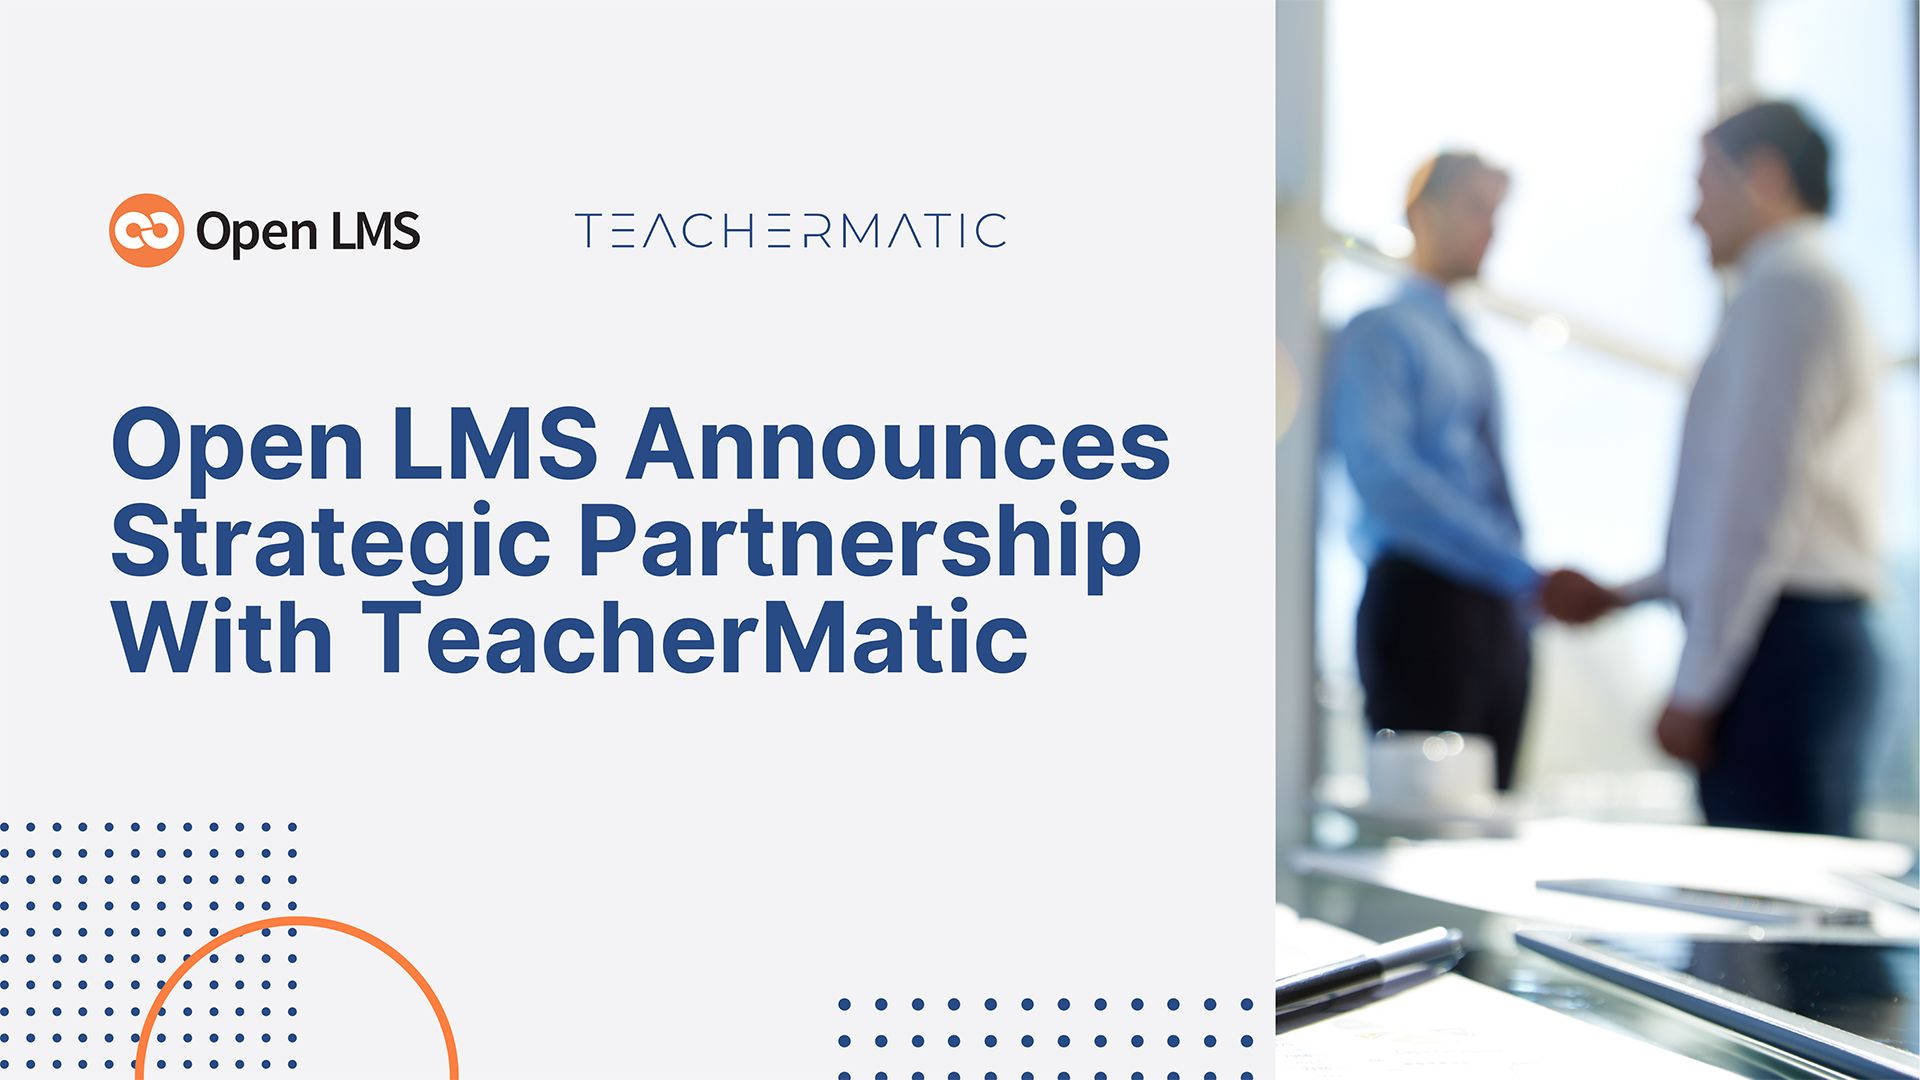 Open LMS Announces Strategic Partnership With TeacherMatic to Help Educators Thrive With AI